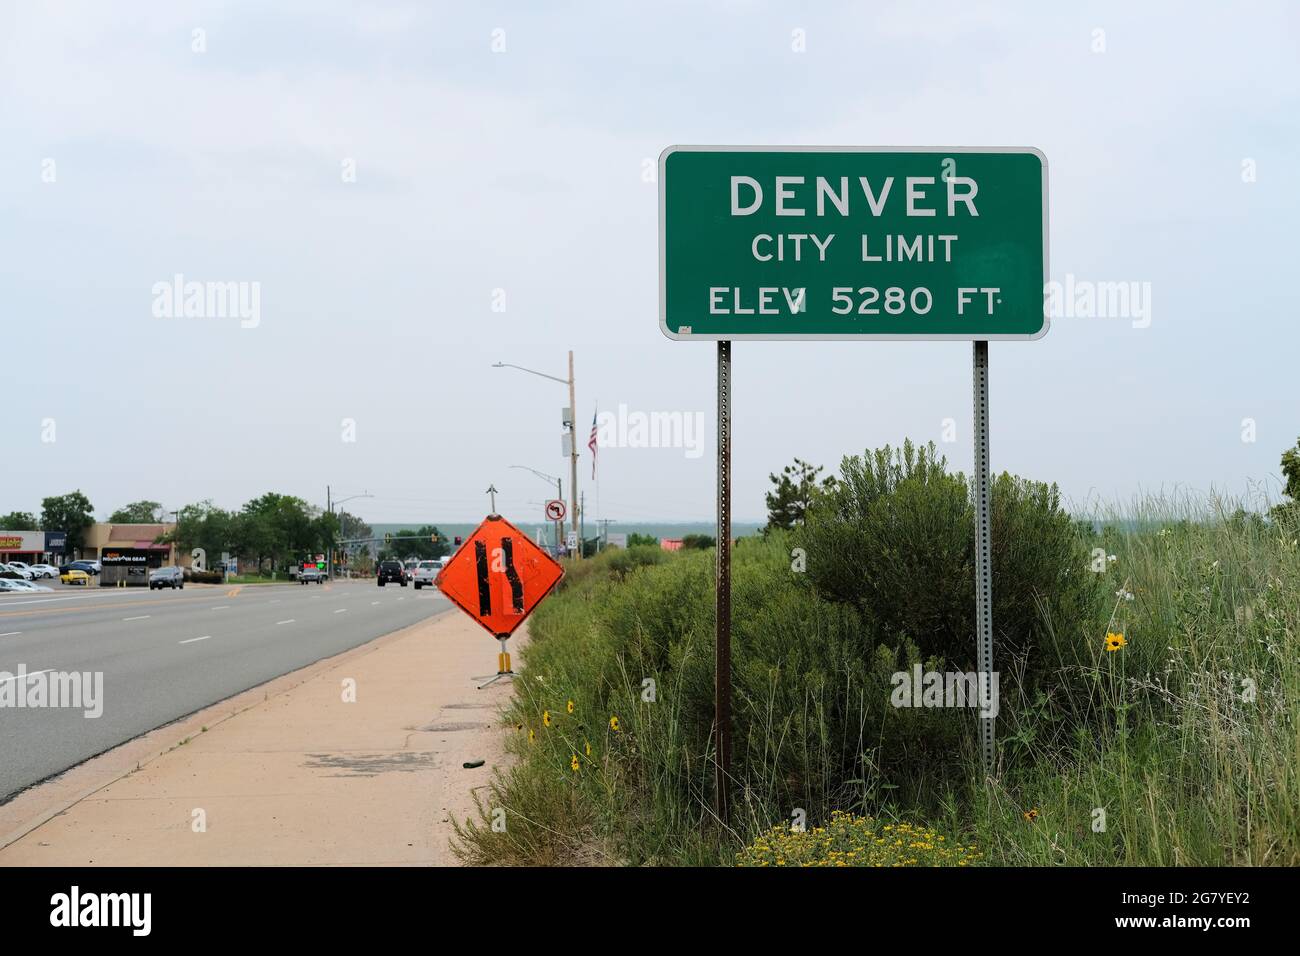 City limit street sign where Aurora, Colorado meets Denver informing visitors of the Mile High City's 5280 foot elevation, one mile above sea level. Stock Photo